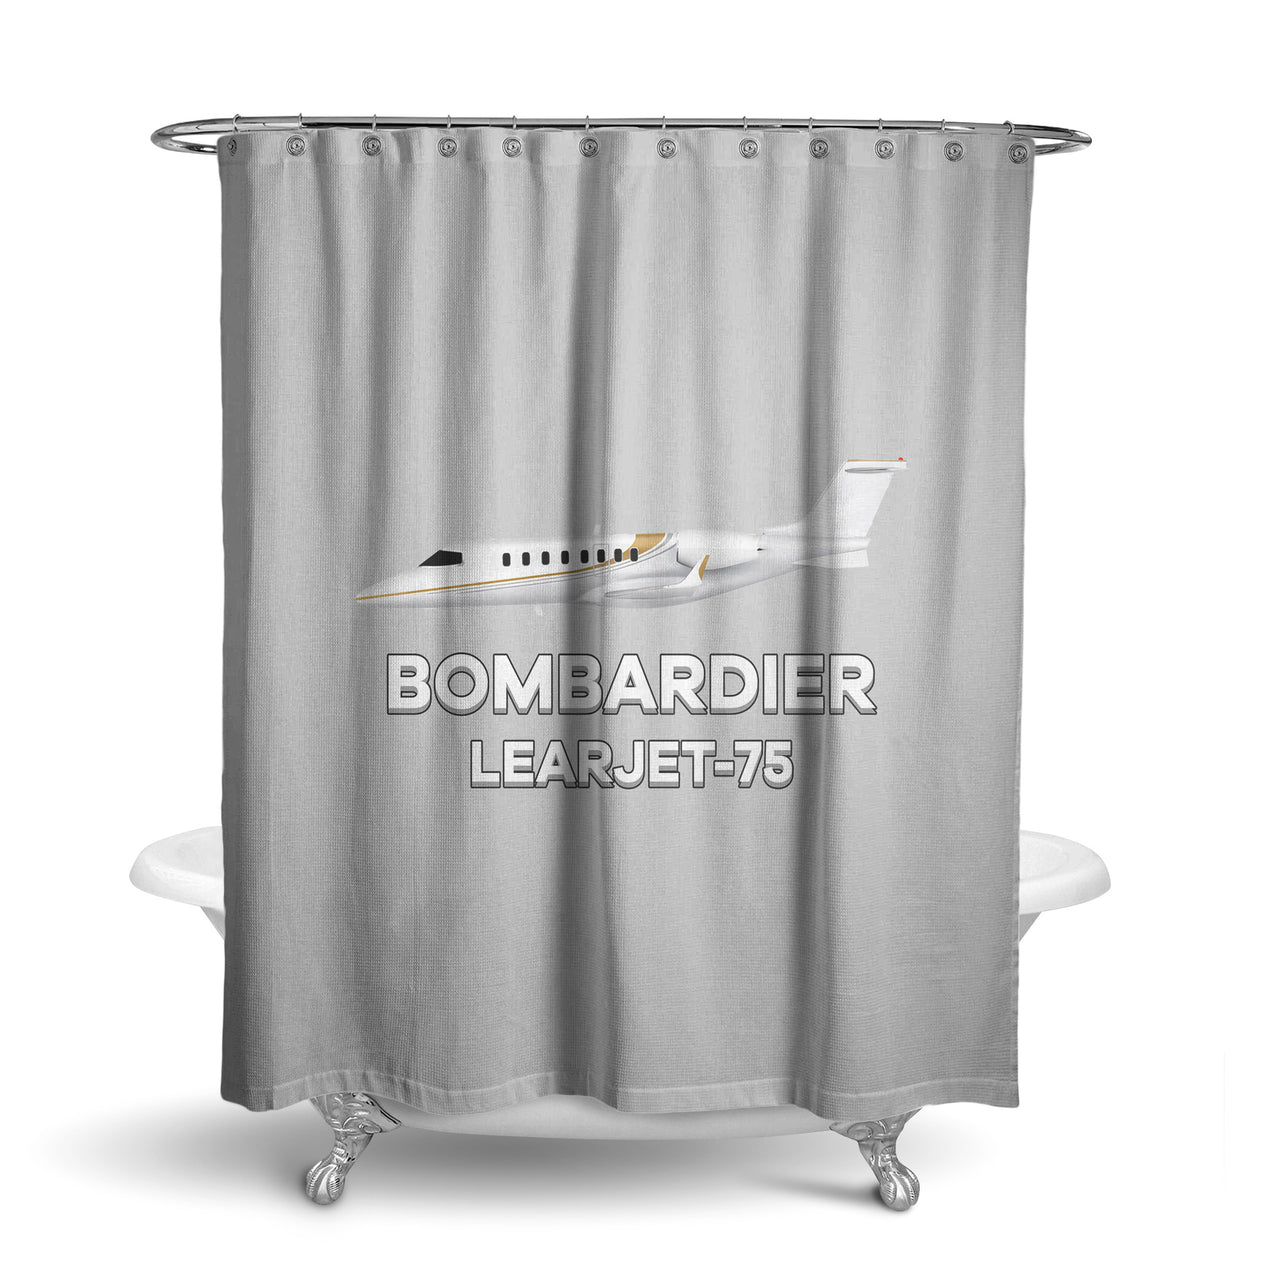 The Bombardier Learjet 75 Designed Shower Curtains